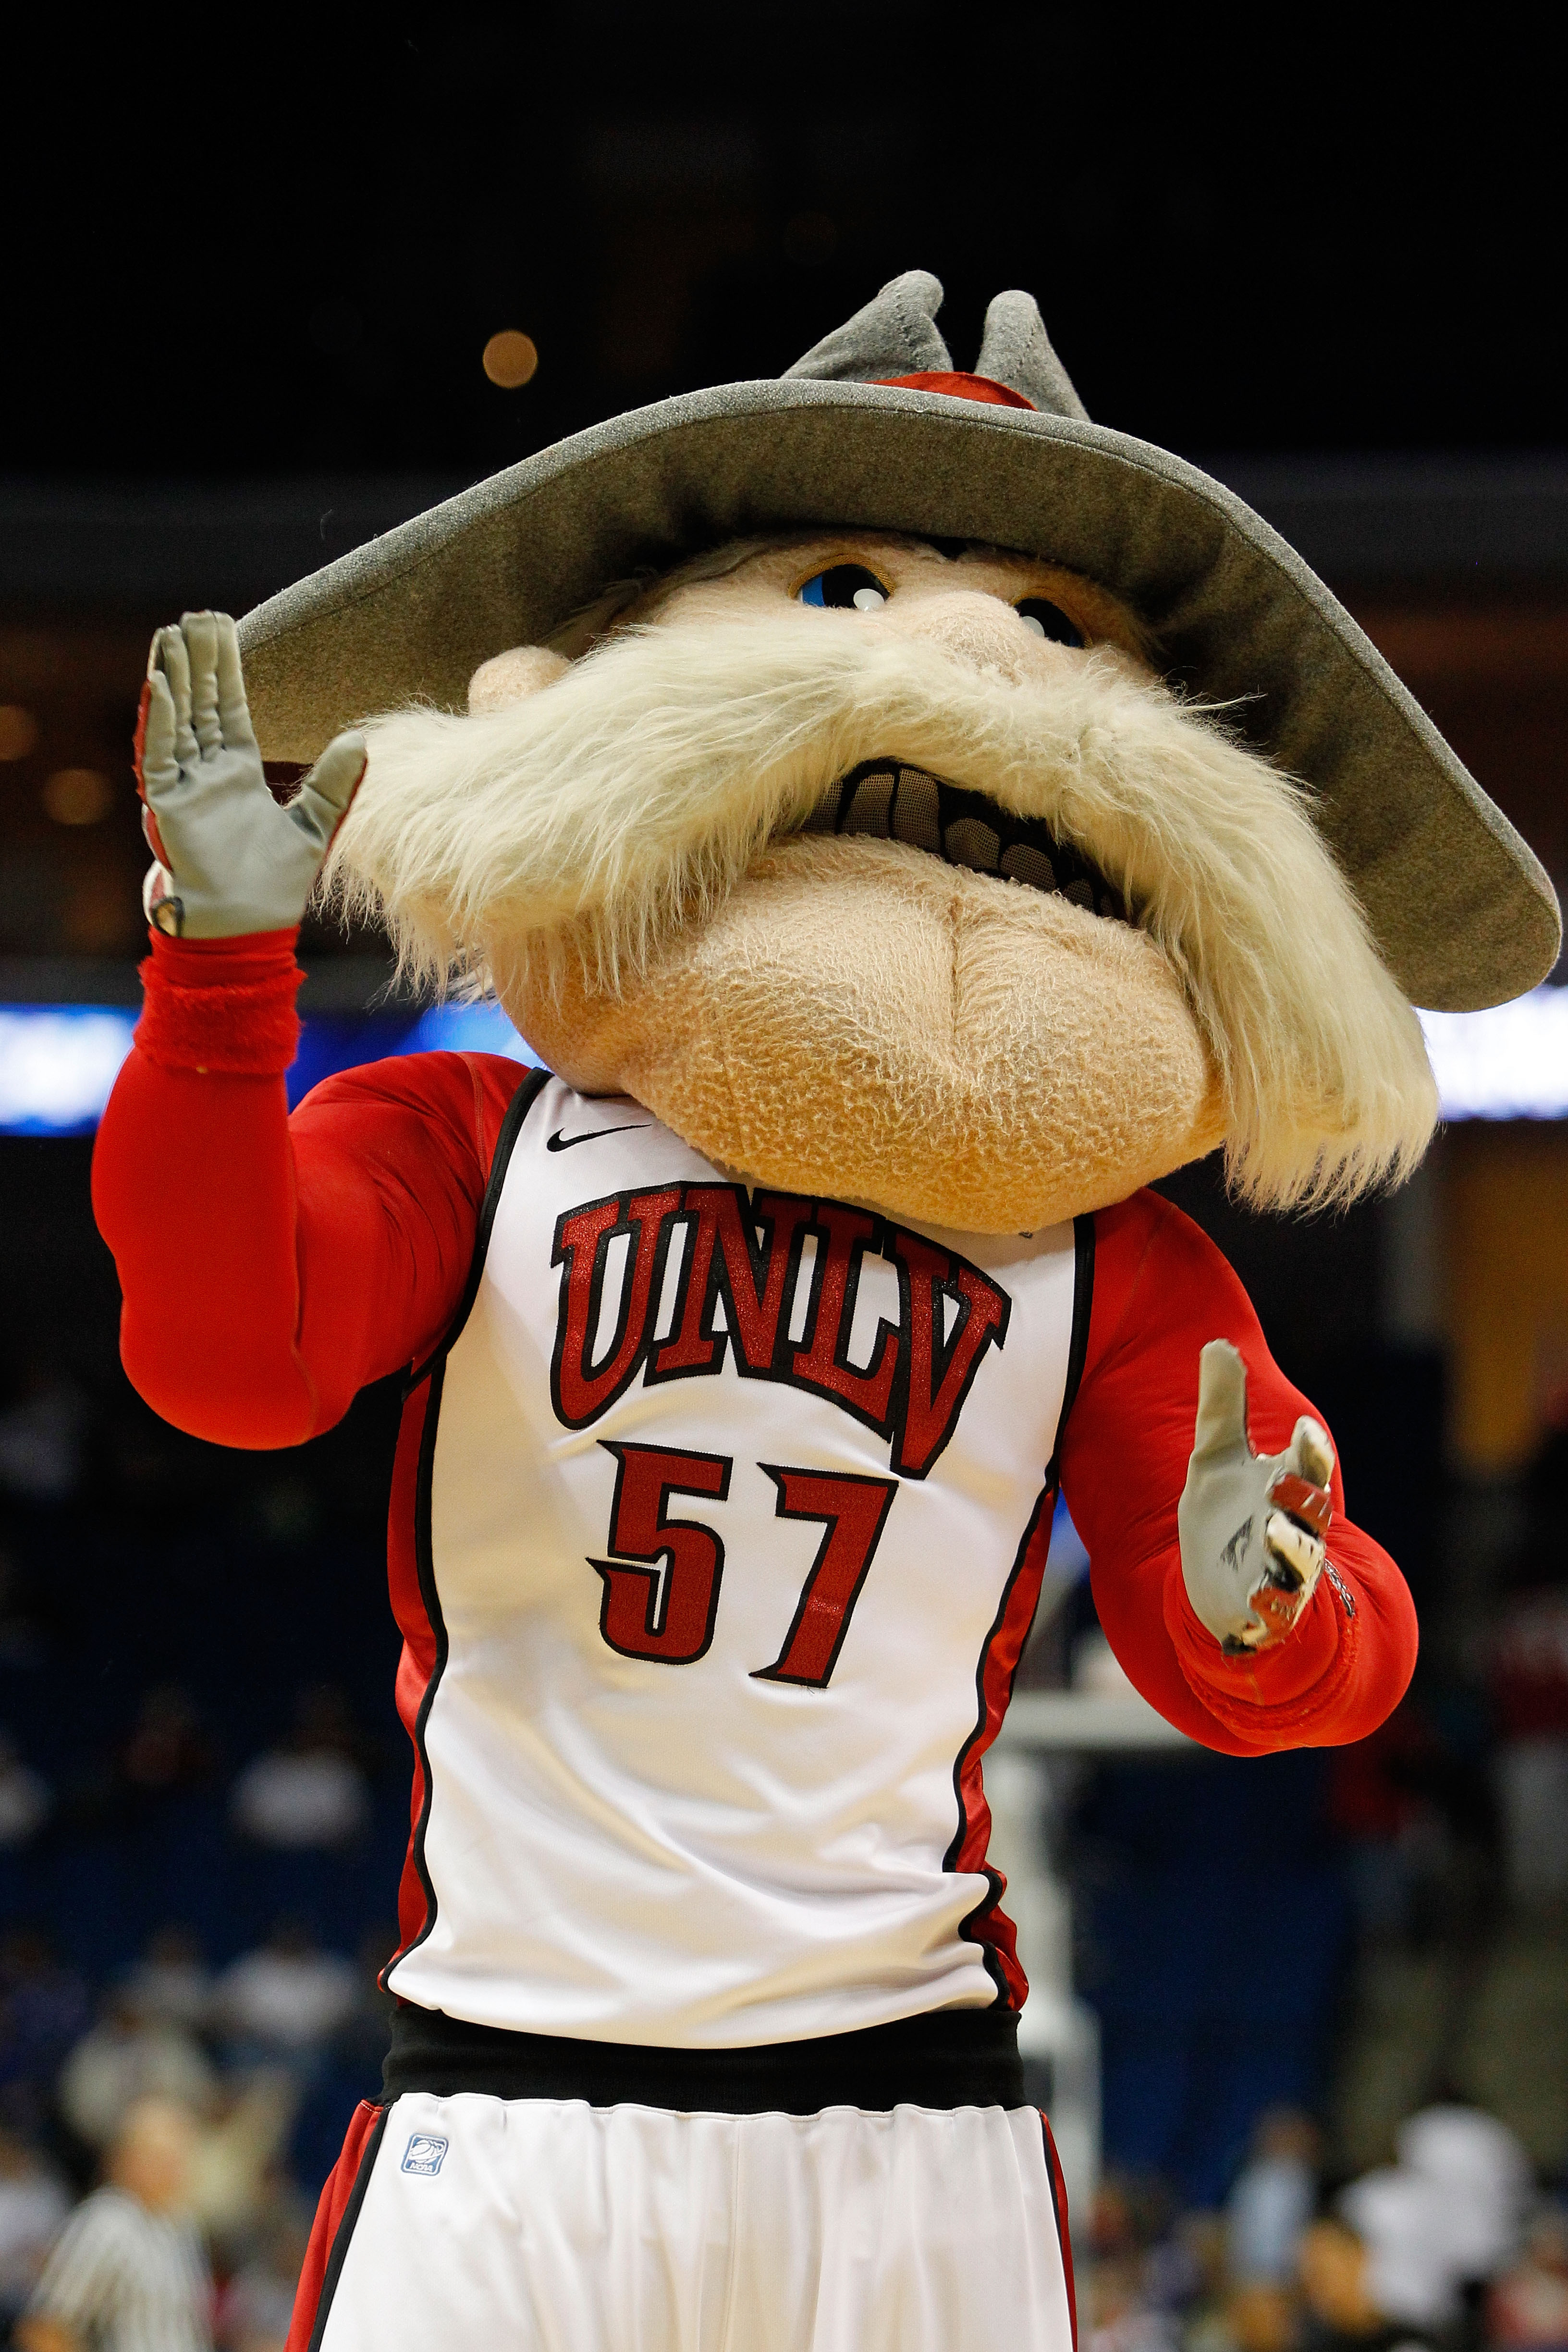 TULSA, OK - MARCH 18:  The UNLV Rebels mascot performs during the second round game against the Illinois Fighting Illini in the 2011 NCAA men's basketball tournament at BOK Center on March 18, 2011 in Tulsa, Oklahoma.  (Photo by Tom Pennington/Getty Image